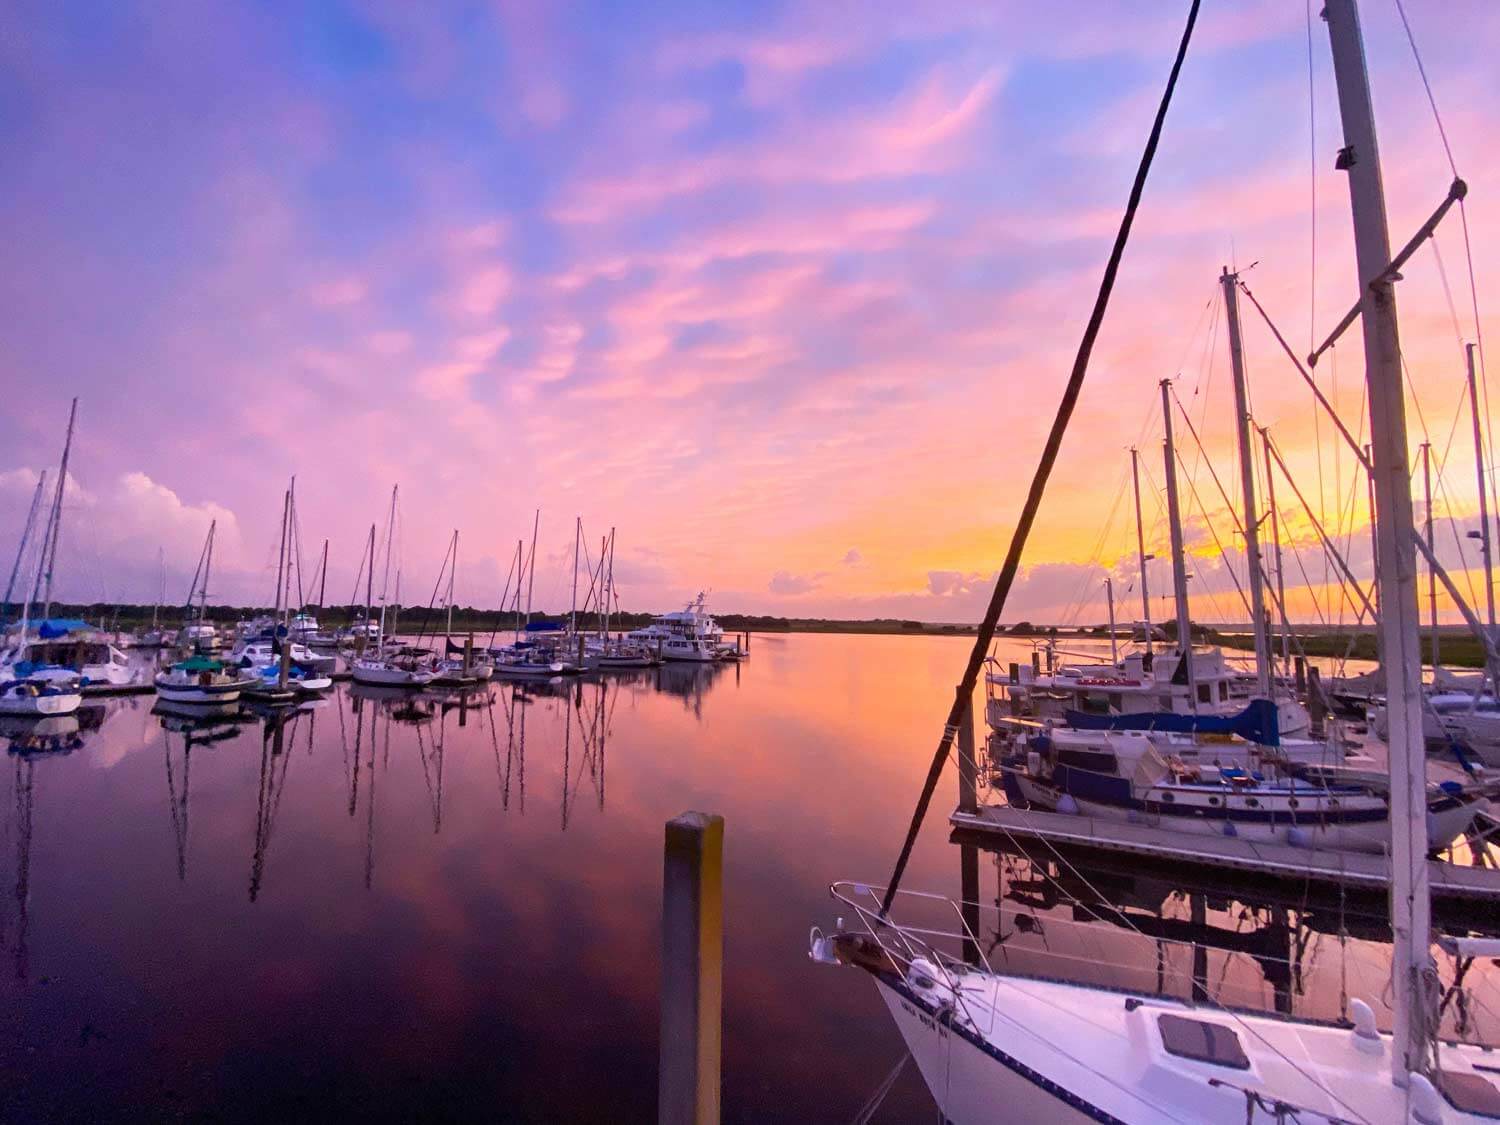 Marina with sailboats at sunset with purple skies